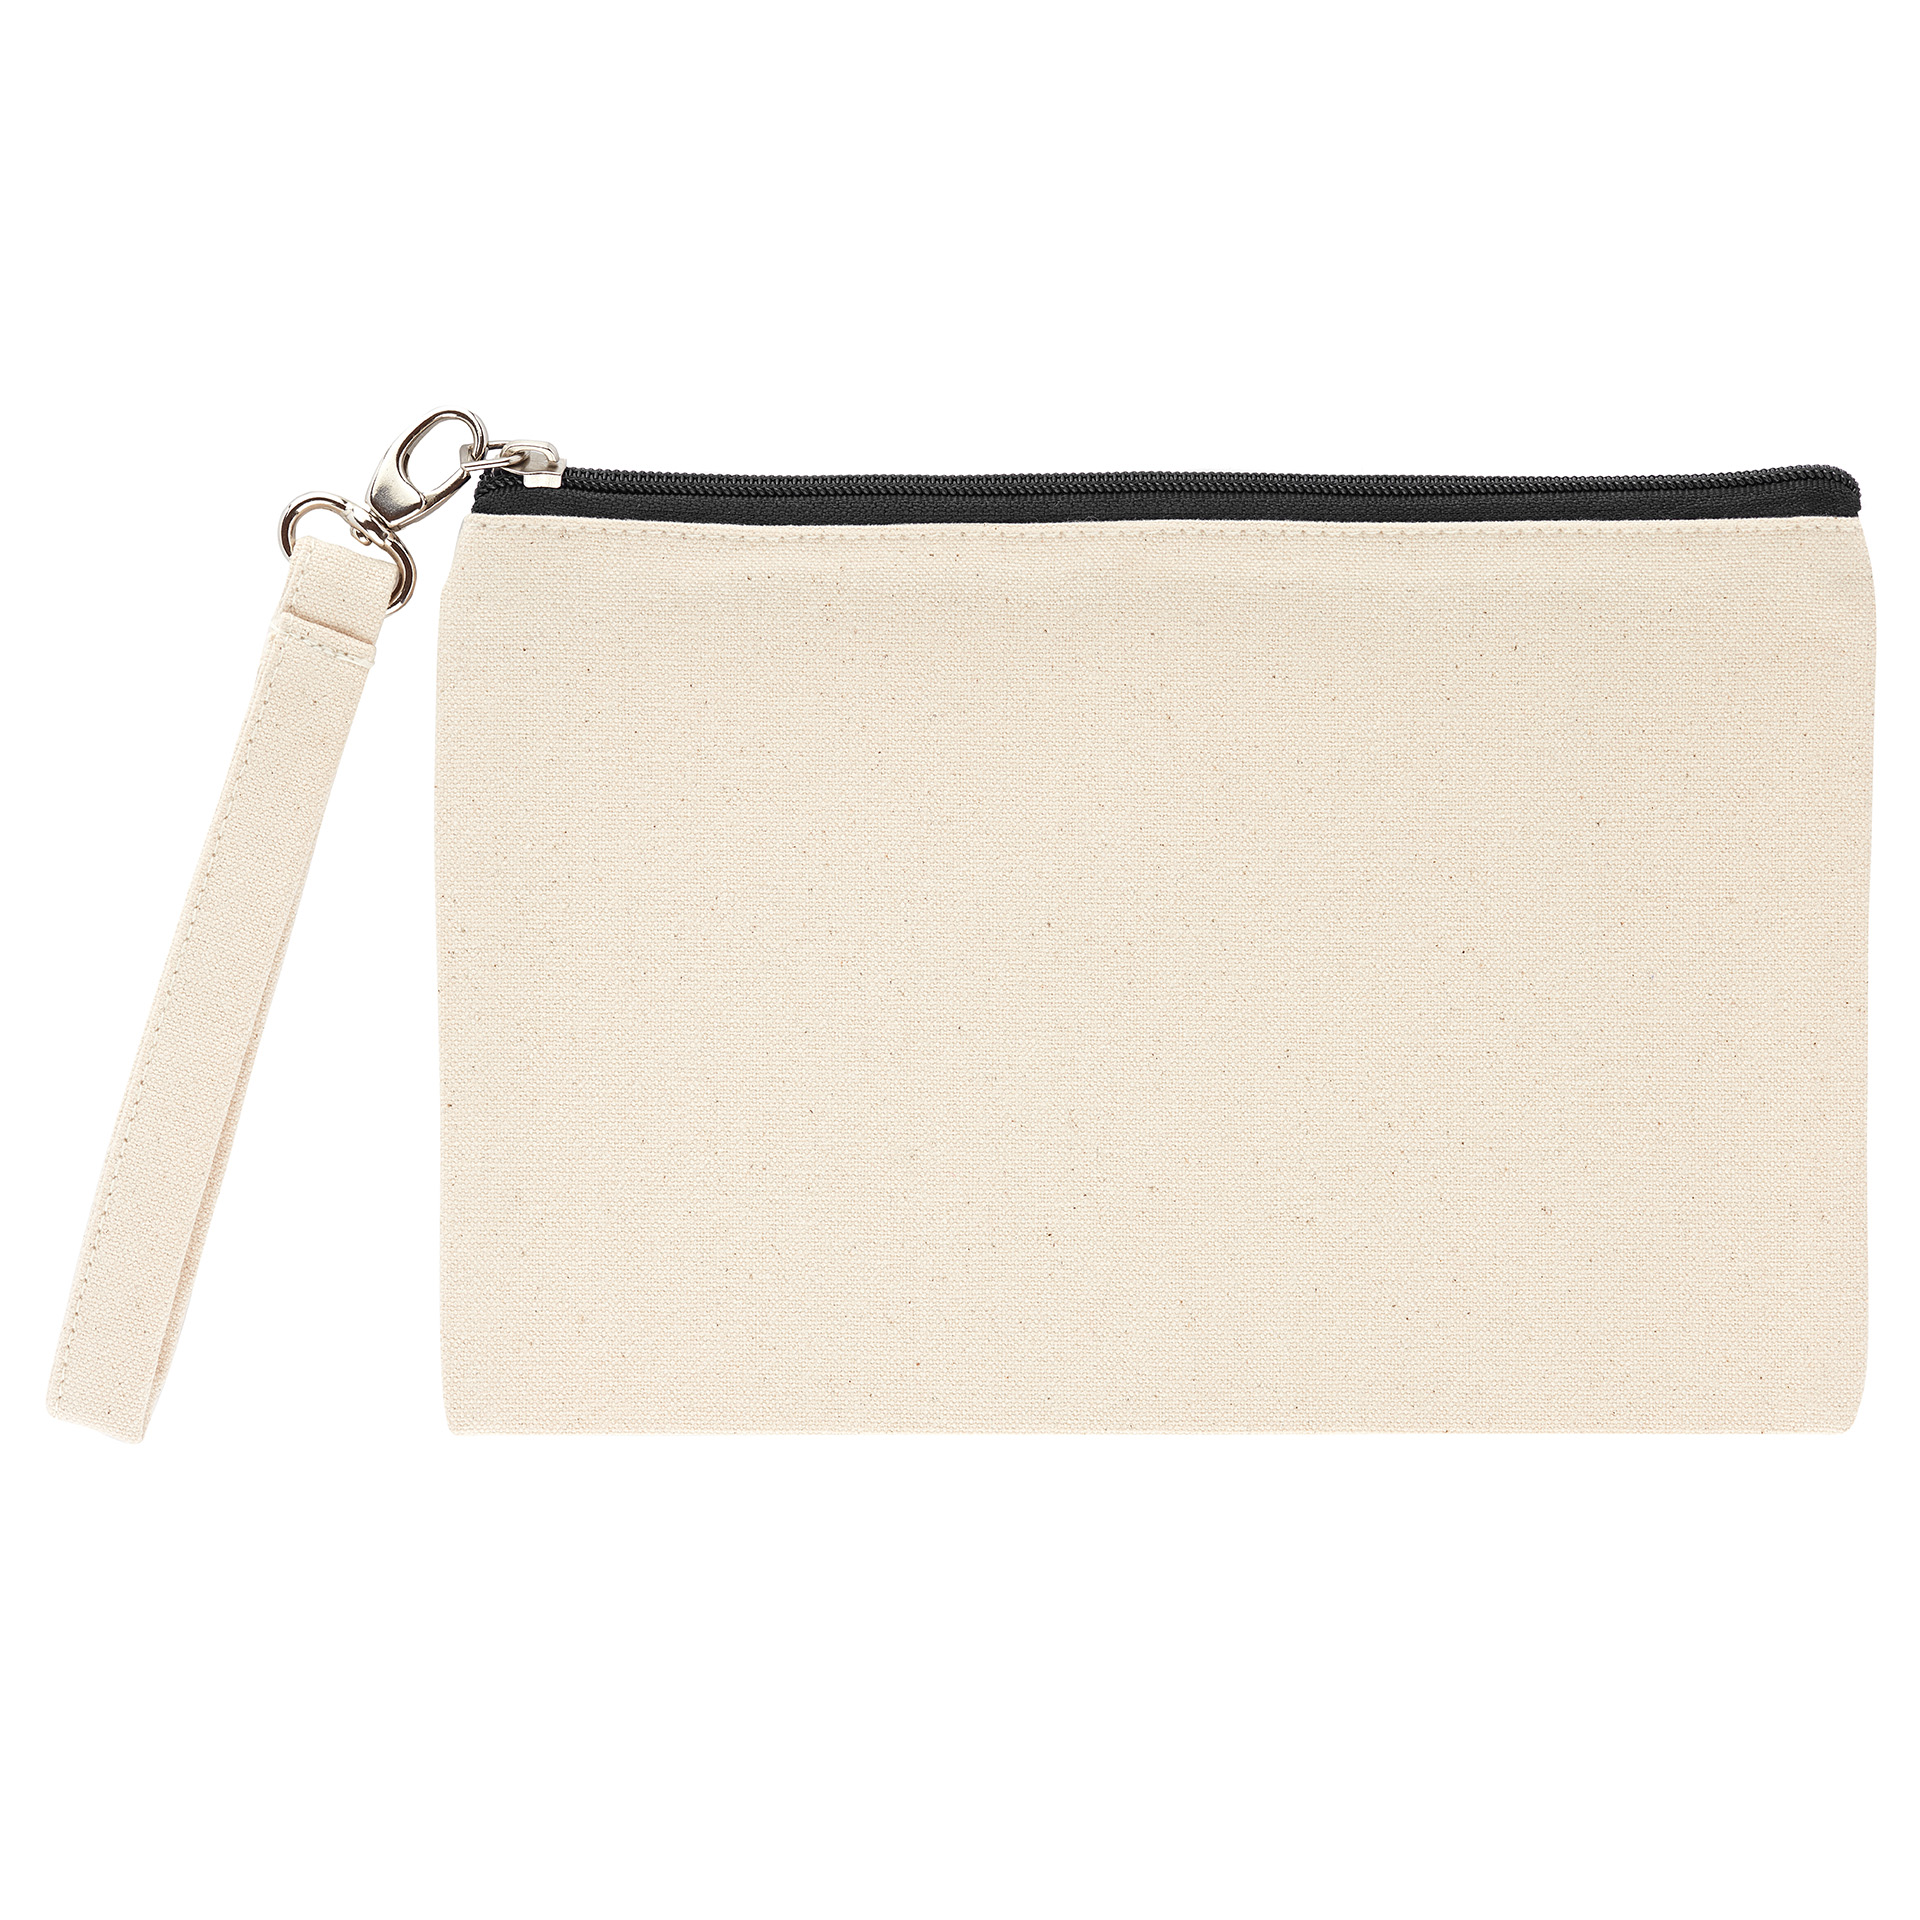 The Green & Good Ascot Cosmetics Pouch is made from Fairtrade & Organic cotton canvas which is natural and unbleached. Practical and chic, it comes with 3 different zip options (natural, black or navy). Quality chrome clip and detachable cotton handle. Ethically produced in India in an audited factory. 10oz / 280gsm Fairtrade & Organic cotton. Natural / Black